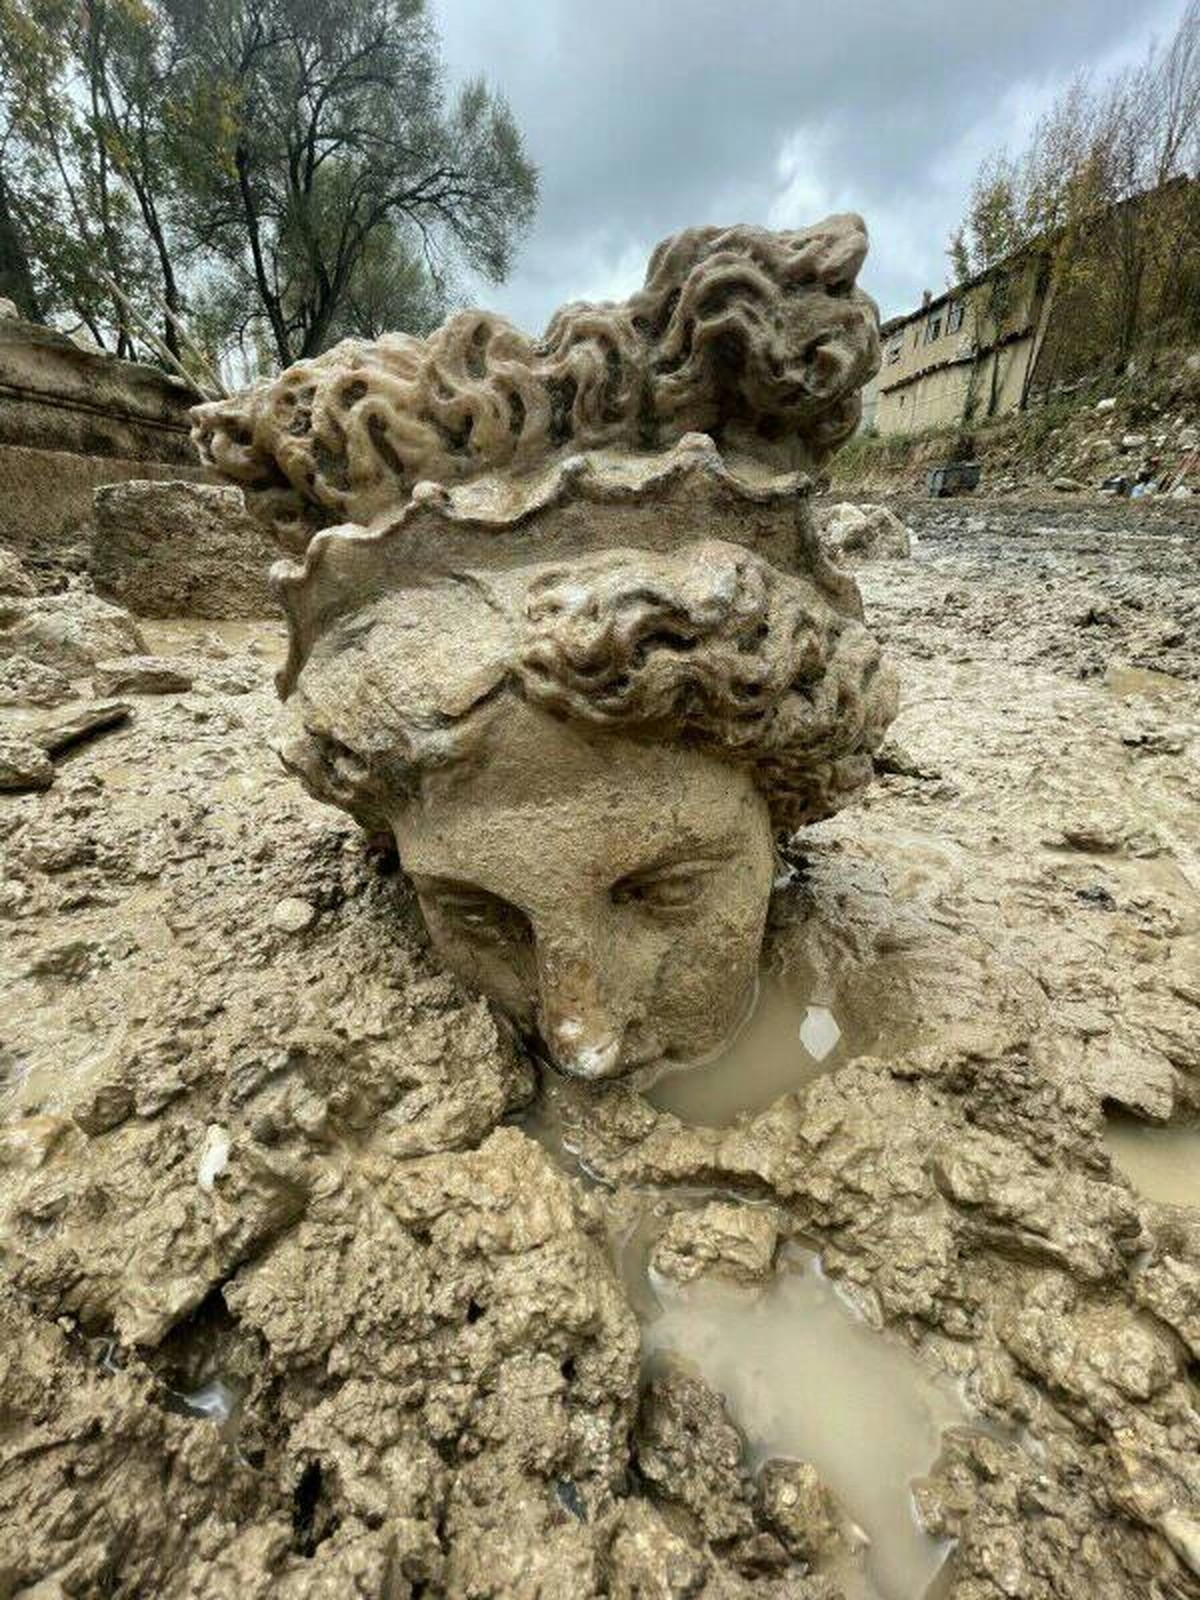   Archaeologists find heads of Greek gods in Turkey;  See photos |  The world

